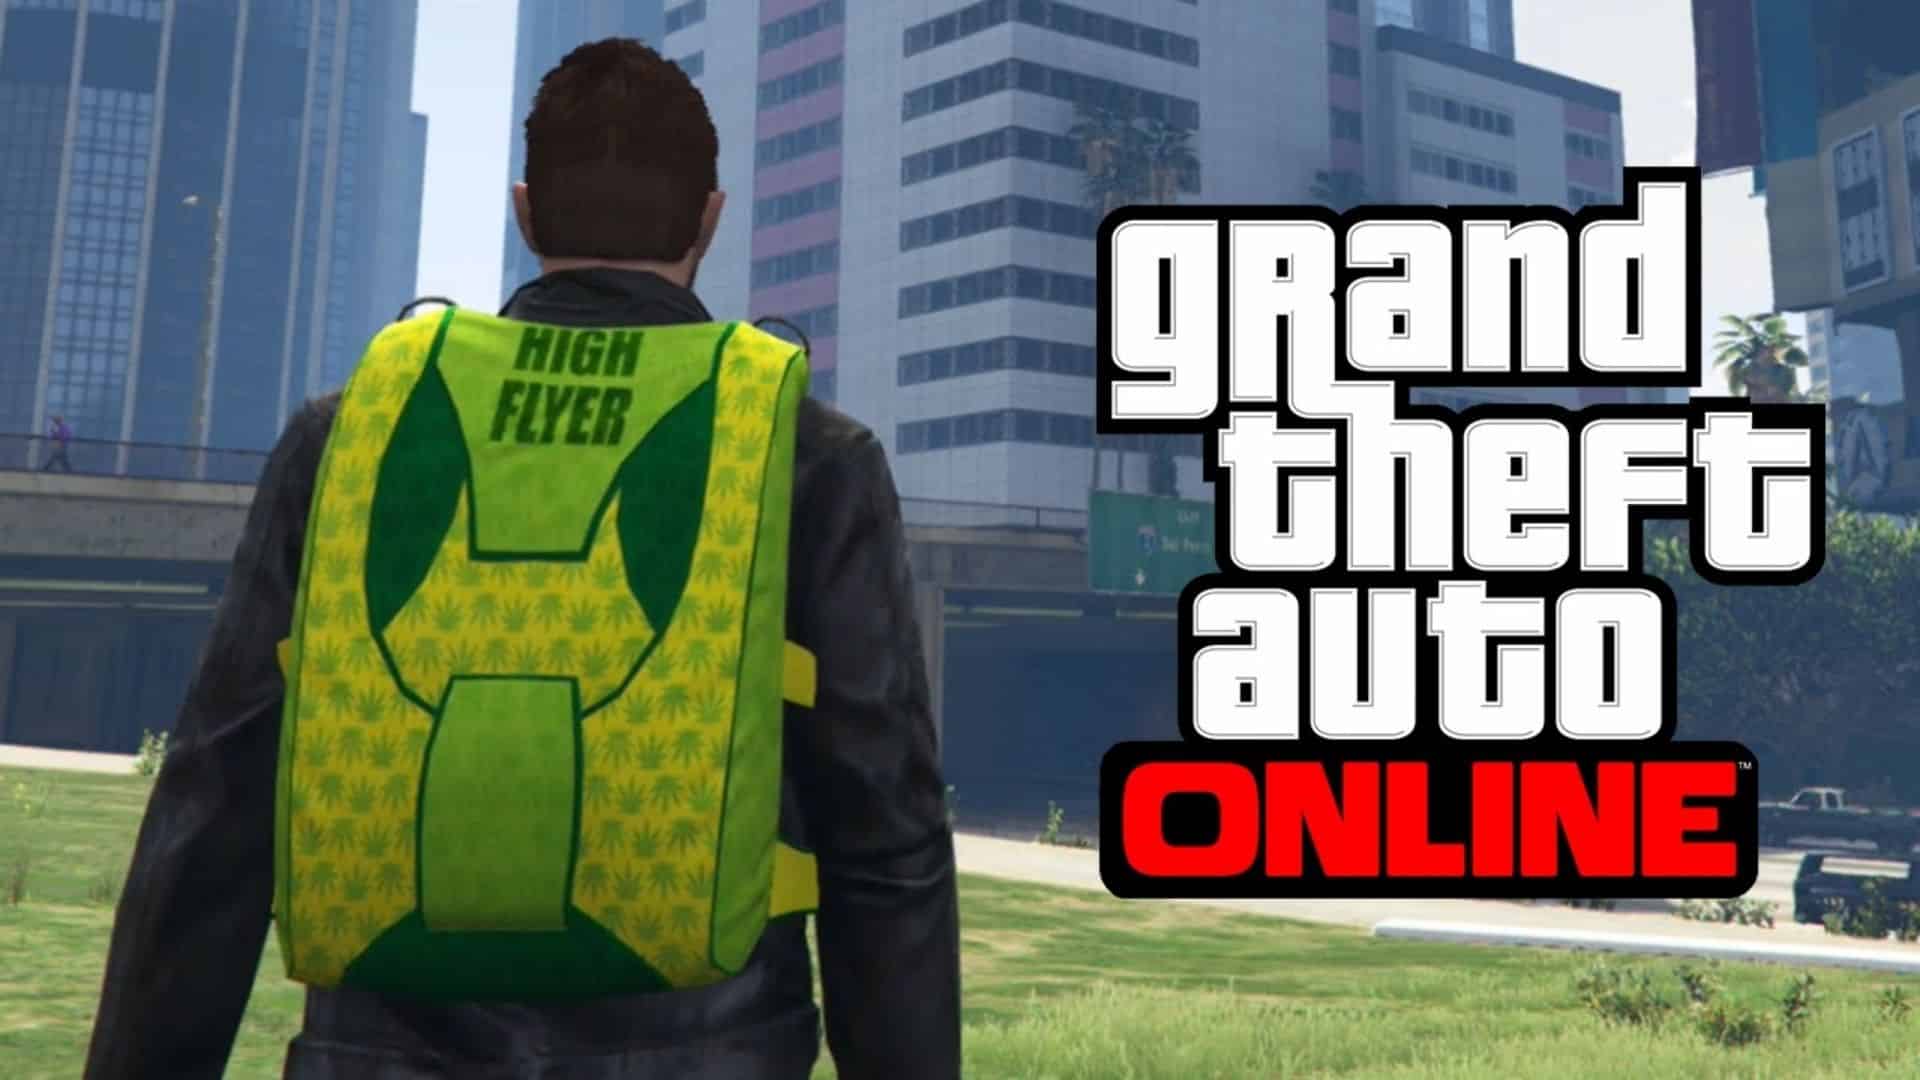 GTA online character with high flyer parachute bag